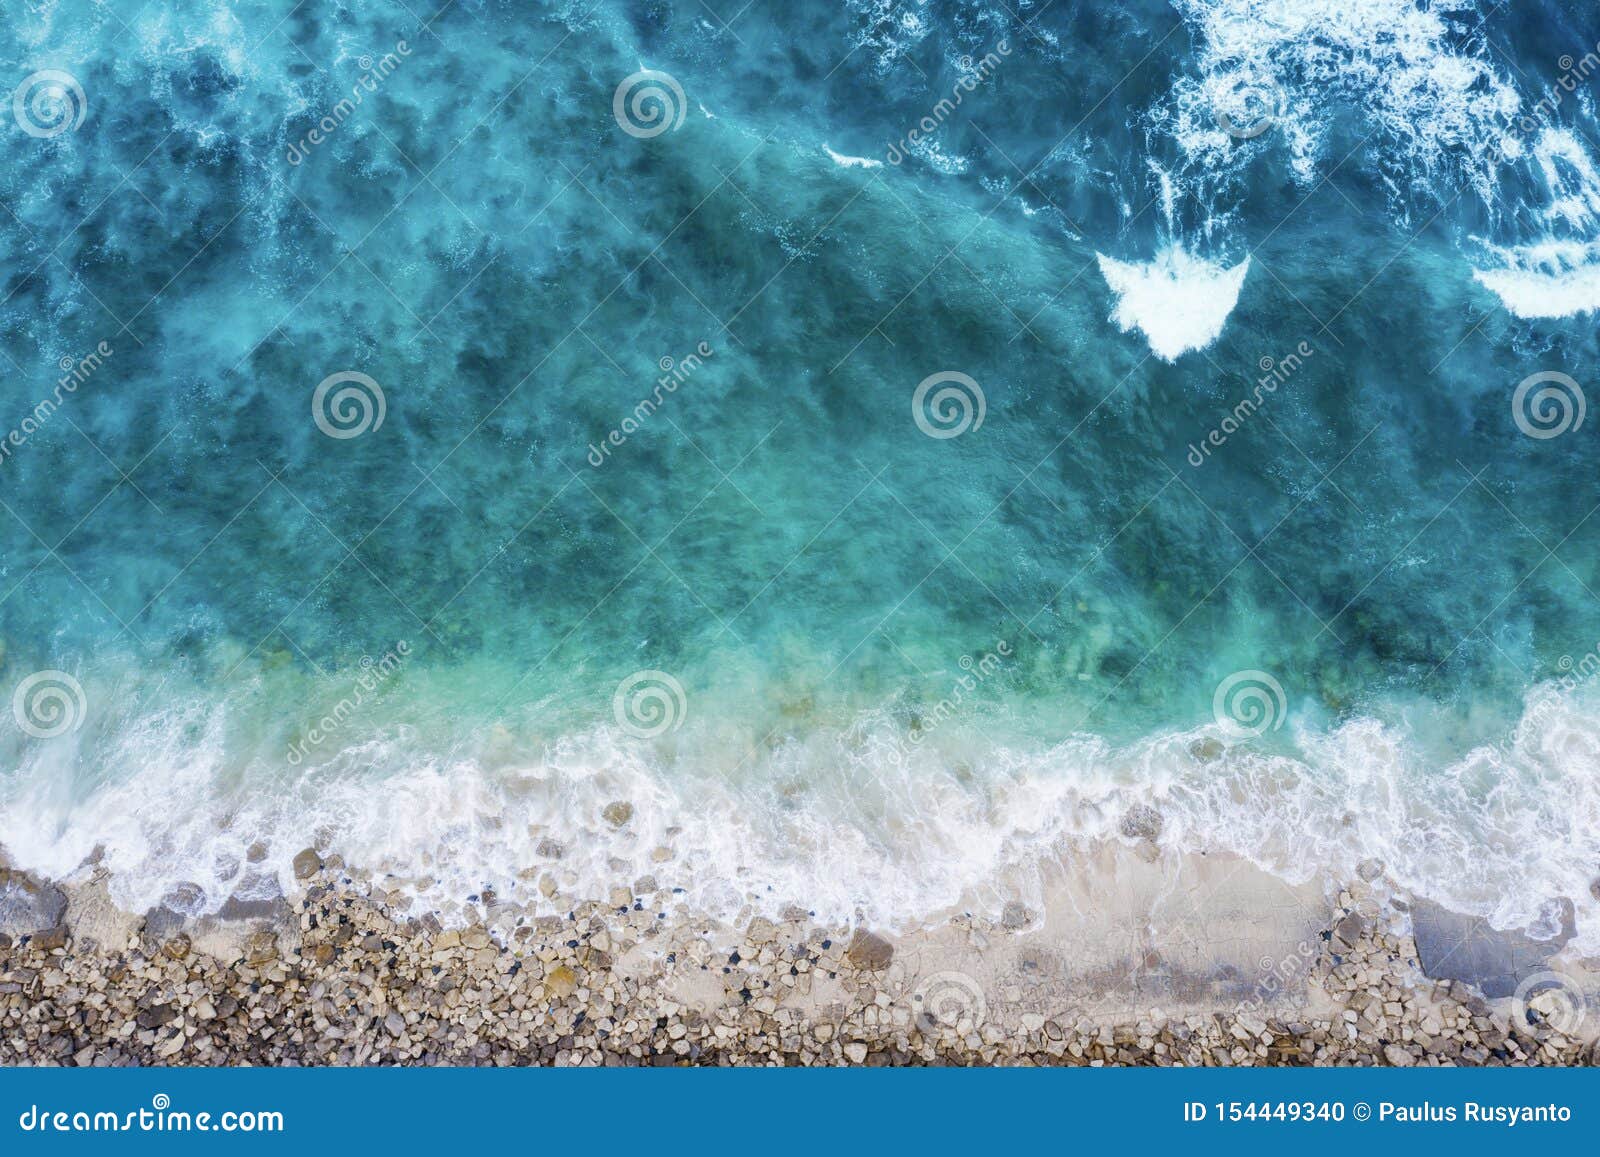 beautiful coastline with stones and frothy waves